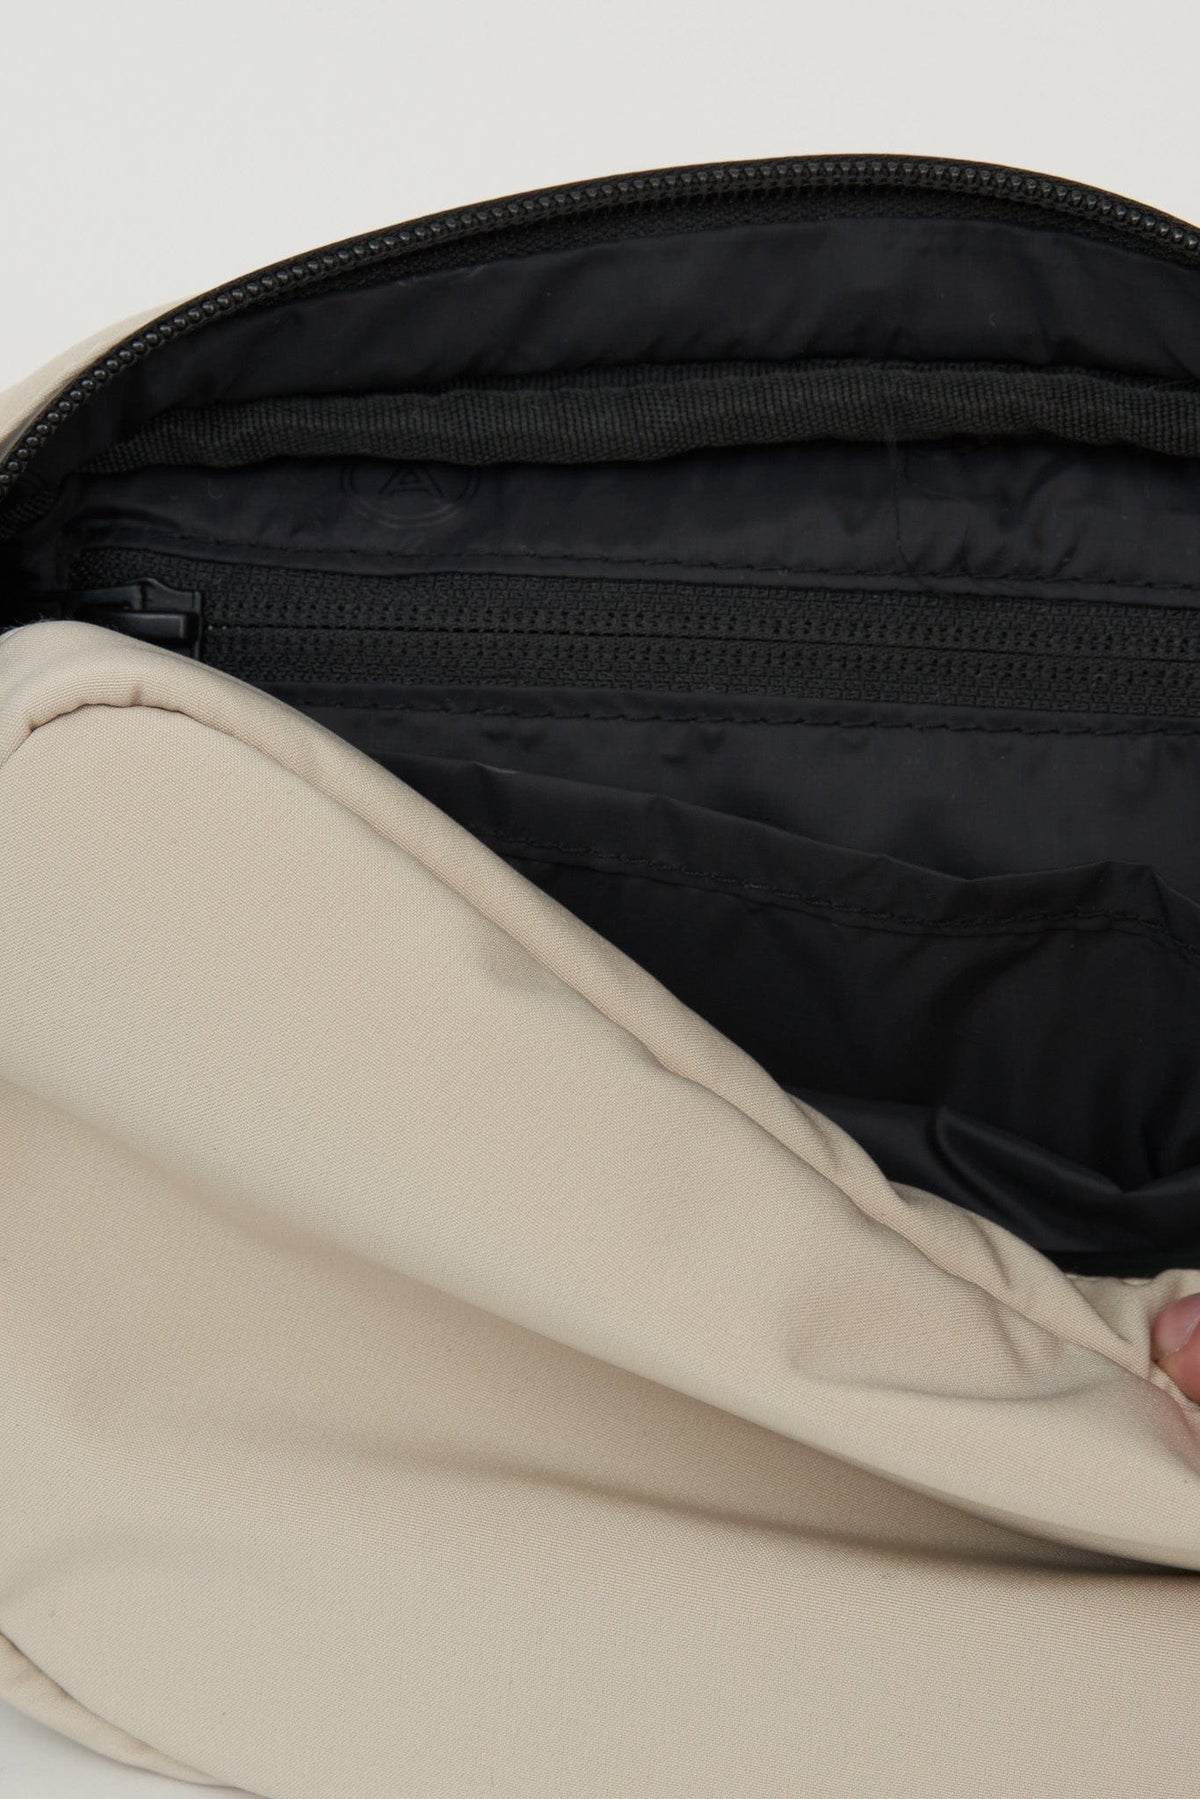 TANTÄ Waterproof Quilted Soft Bag